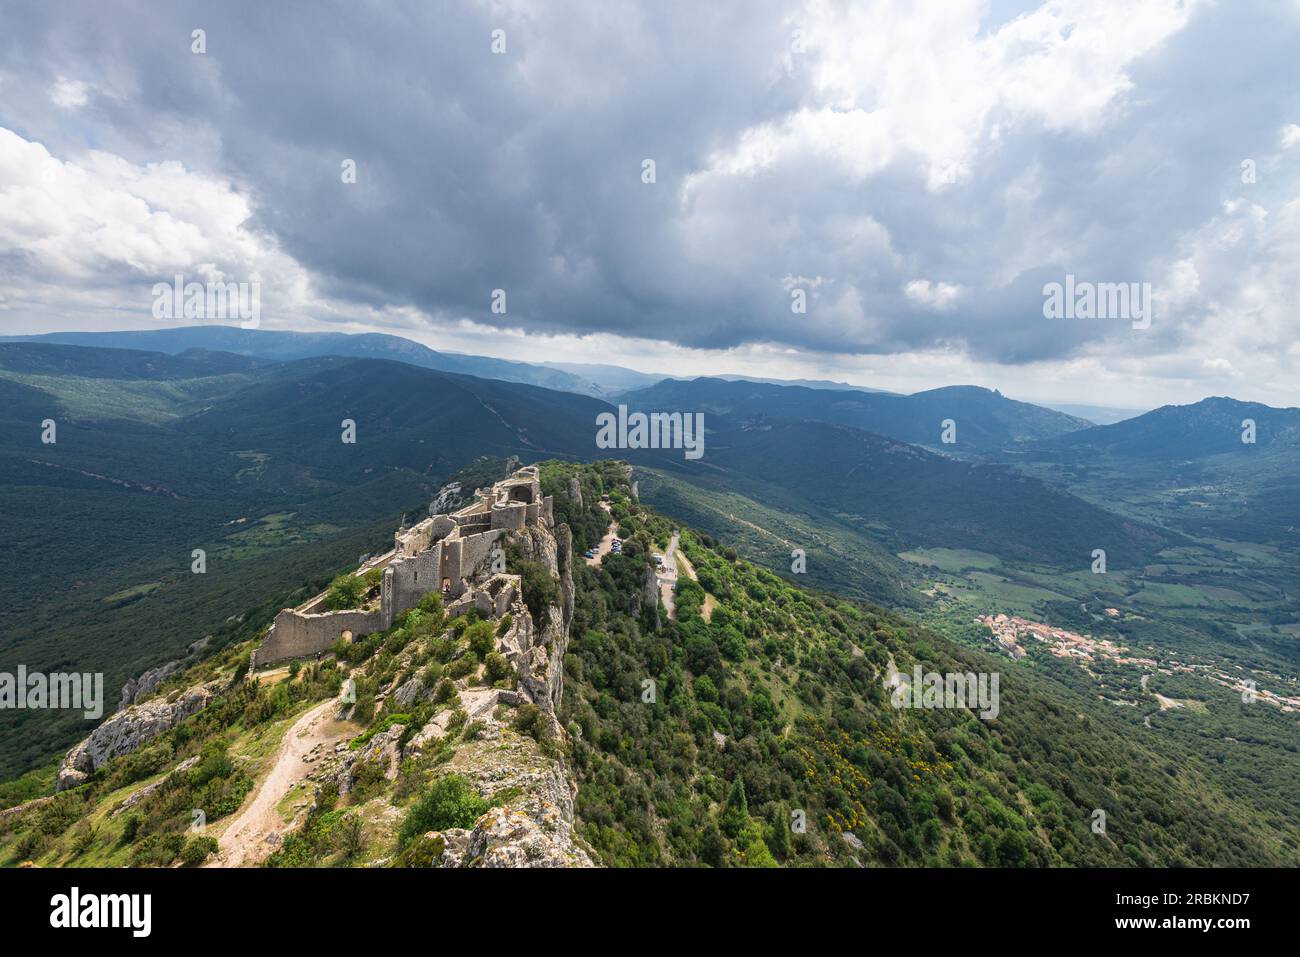 Peyrepertuse (Languedocien: Castèl de Pèirapertusa) is a ruined fortress and one of the so-called Cathar castles located high in the French Pyrénées. Stock Photo